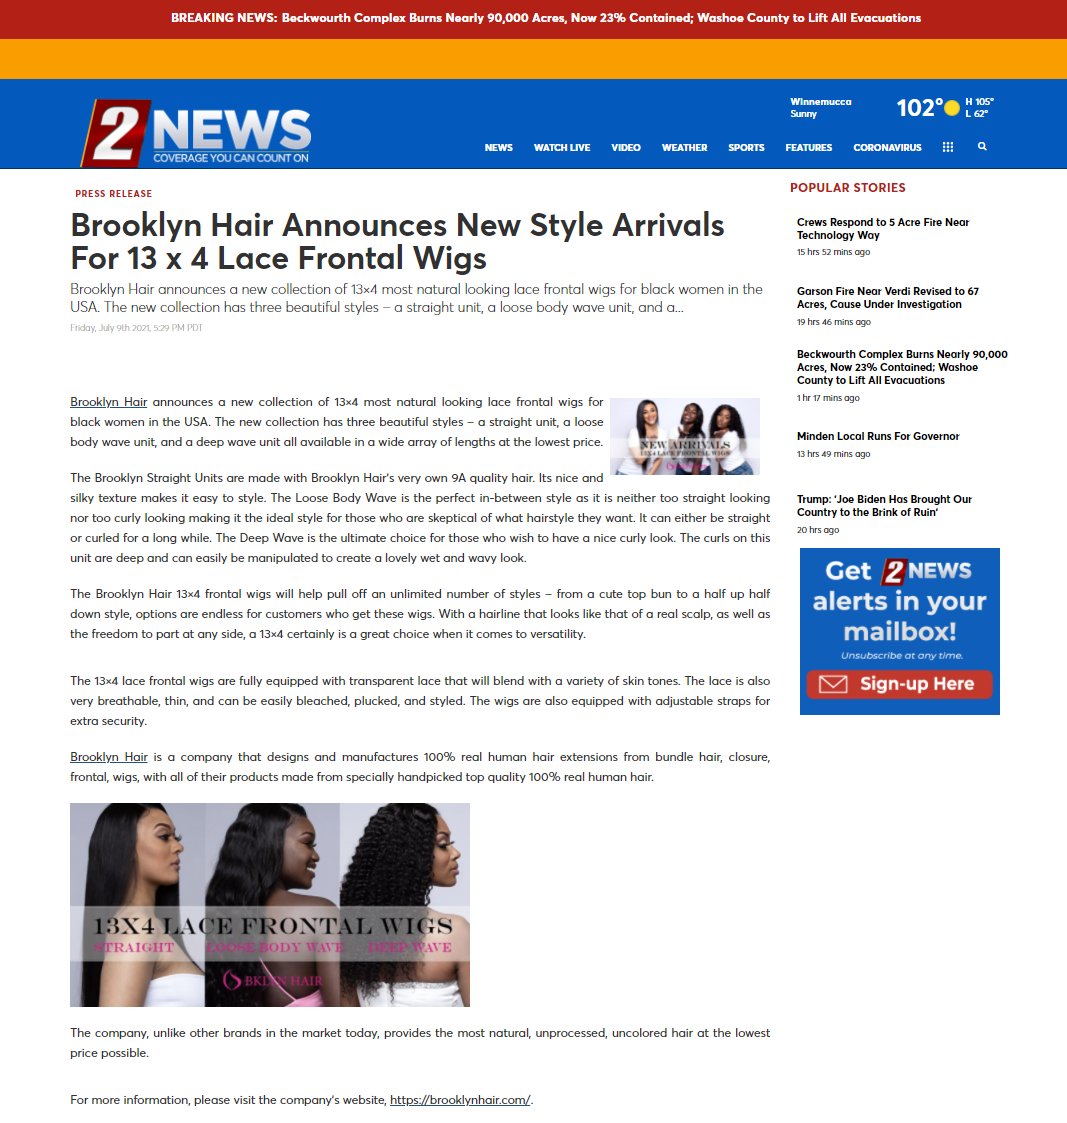 Brooklyn Hair Announces New Style Arrivals For 13 x 4 Lace Frontal Wigs